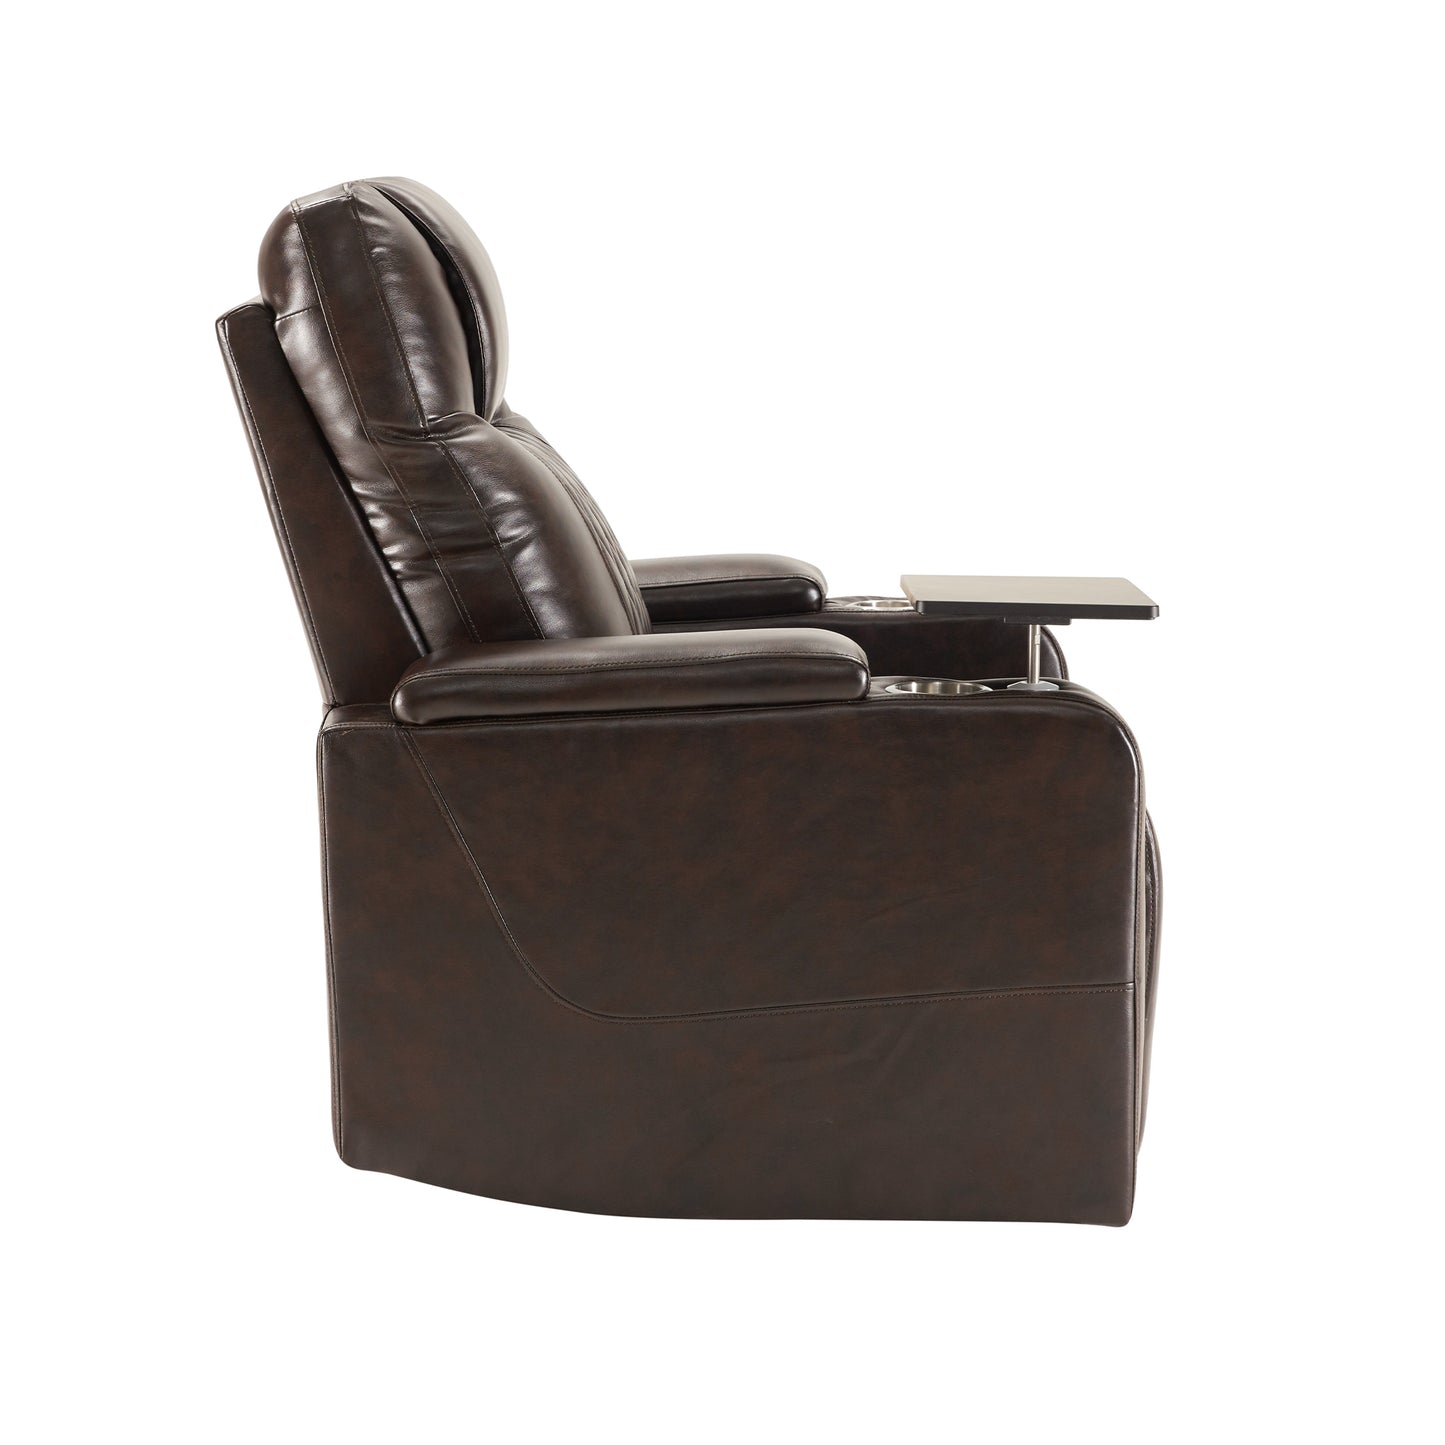 Luxurious Brown Power Motion Recliner with USB Charging Port and Swivel Tray Table